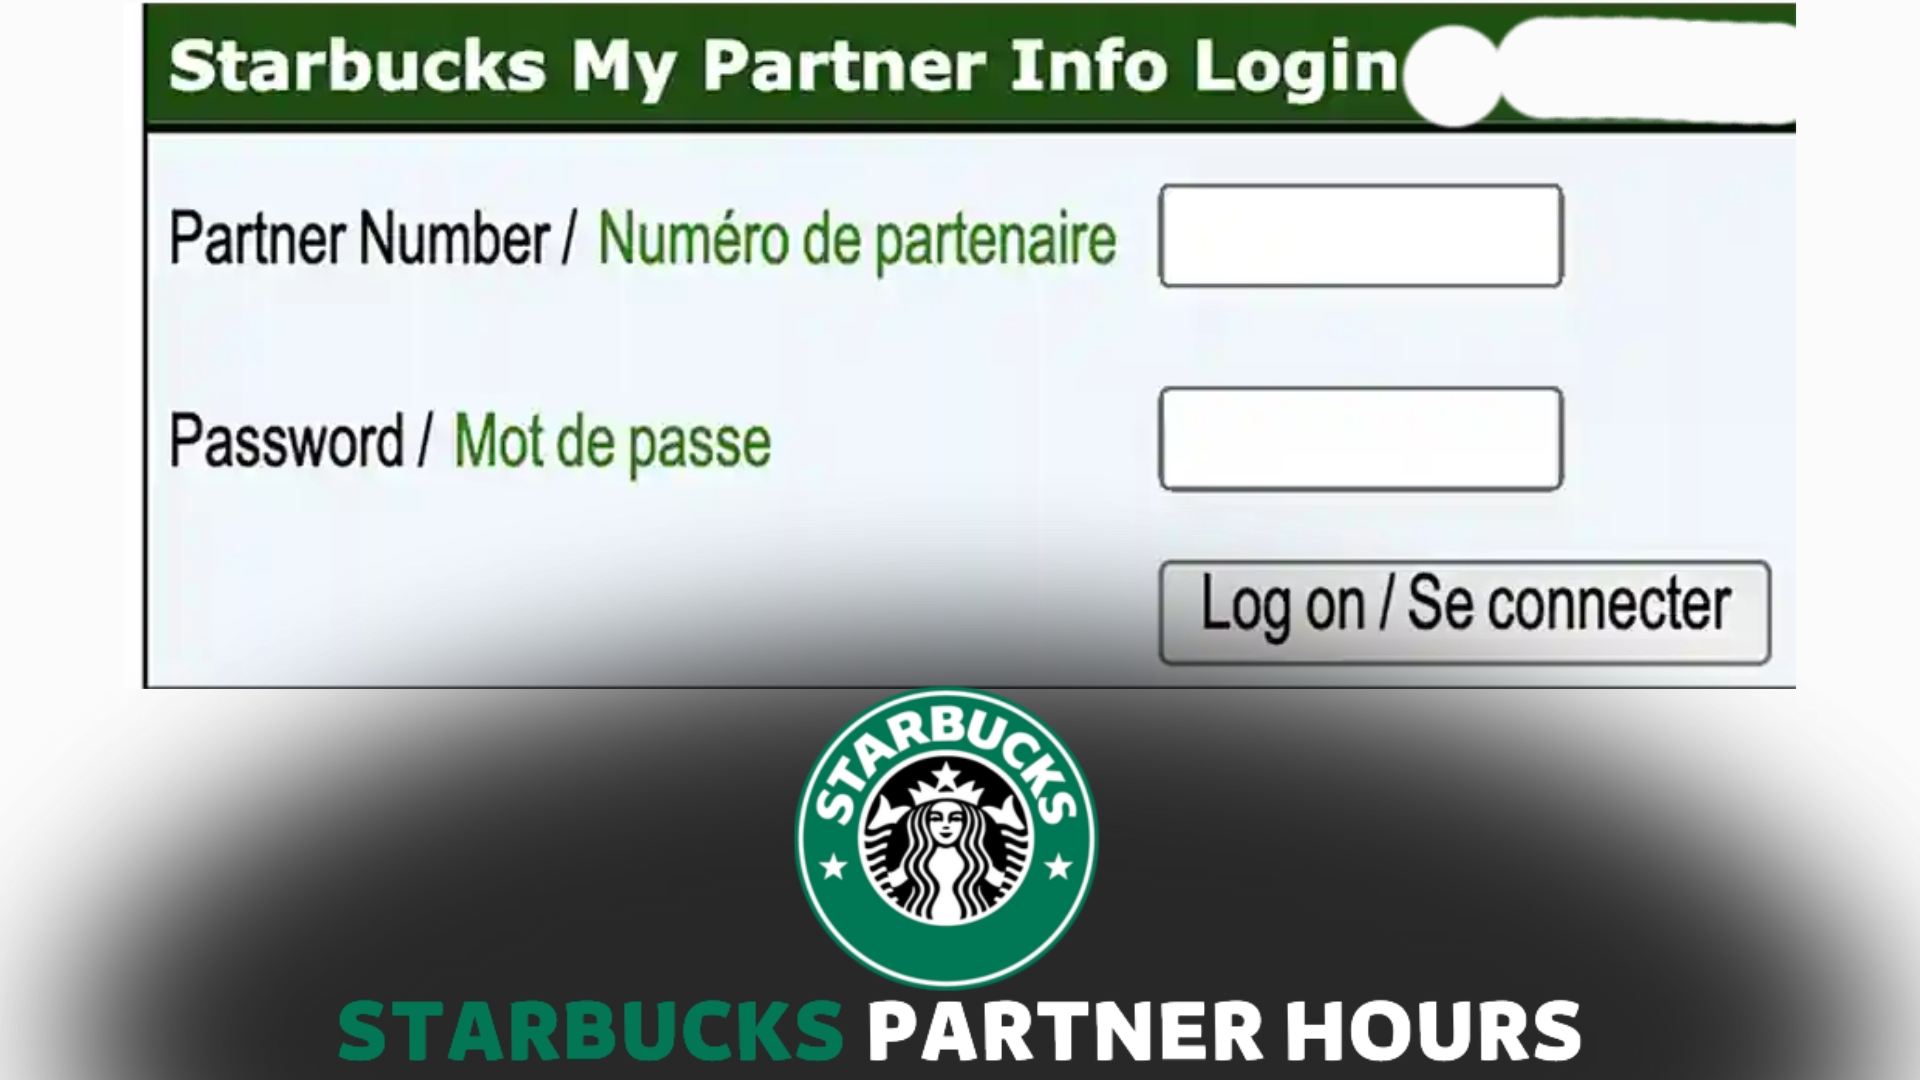 What are the New Password Requirements for Starbucks Partner Logins